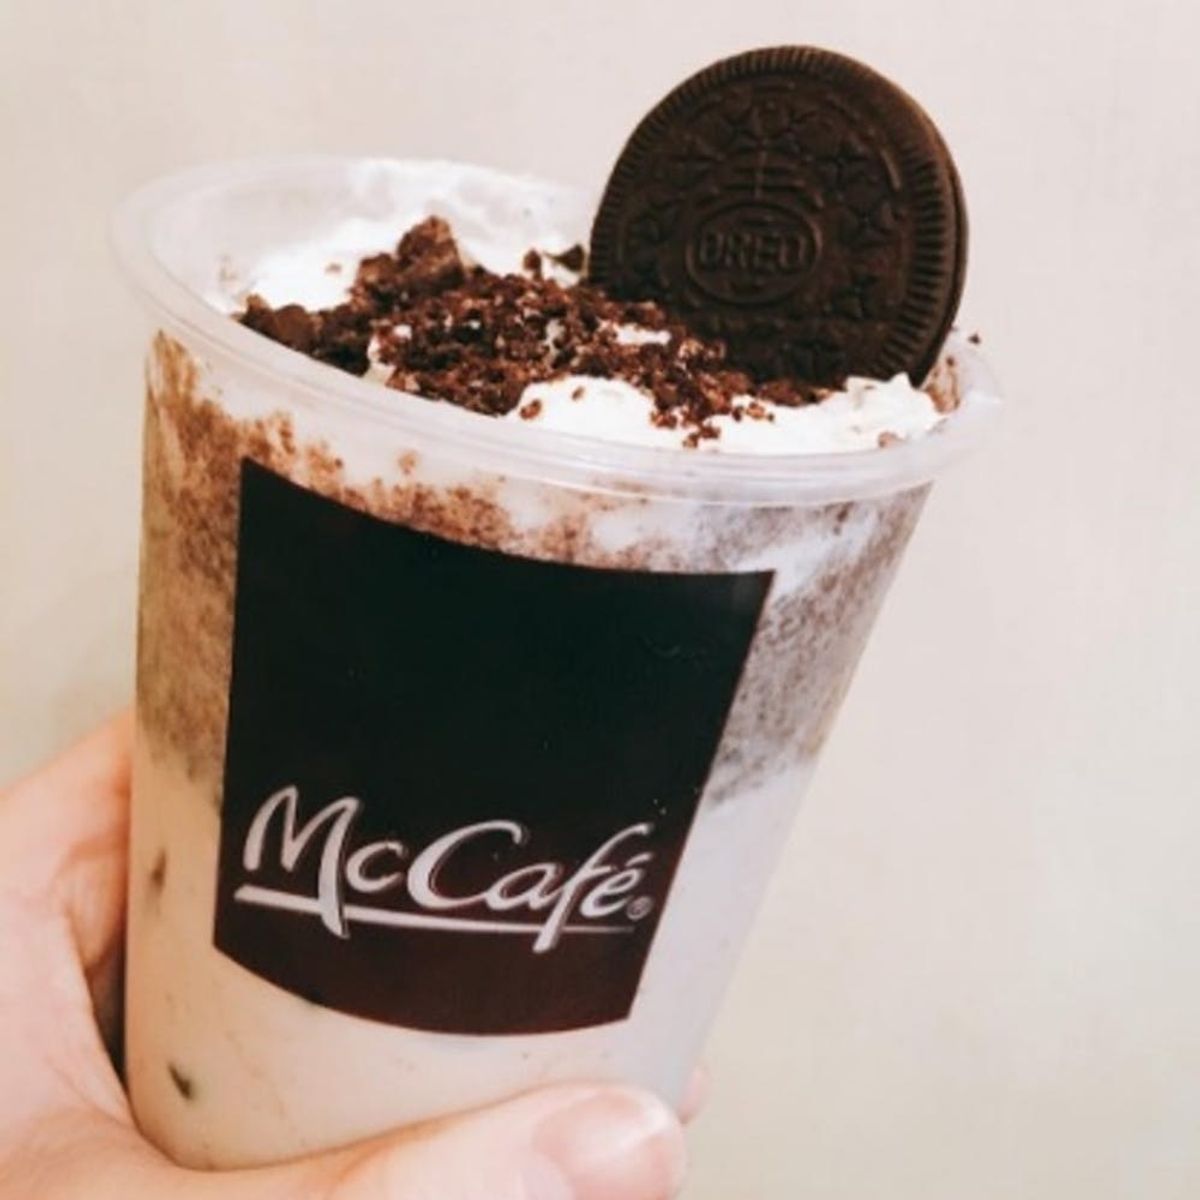 McDonald’s Has Introduced an Awesome-Looking Oreo-Themed Menu